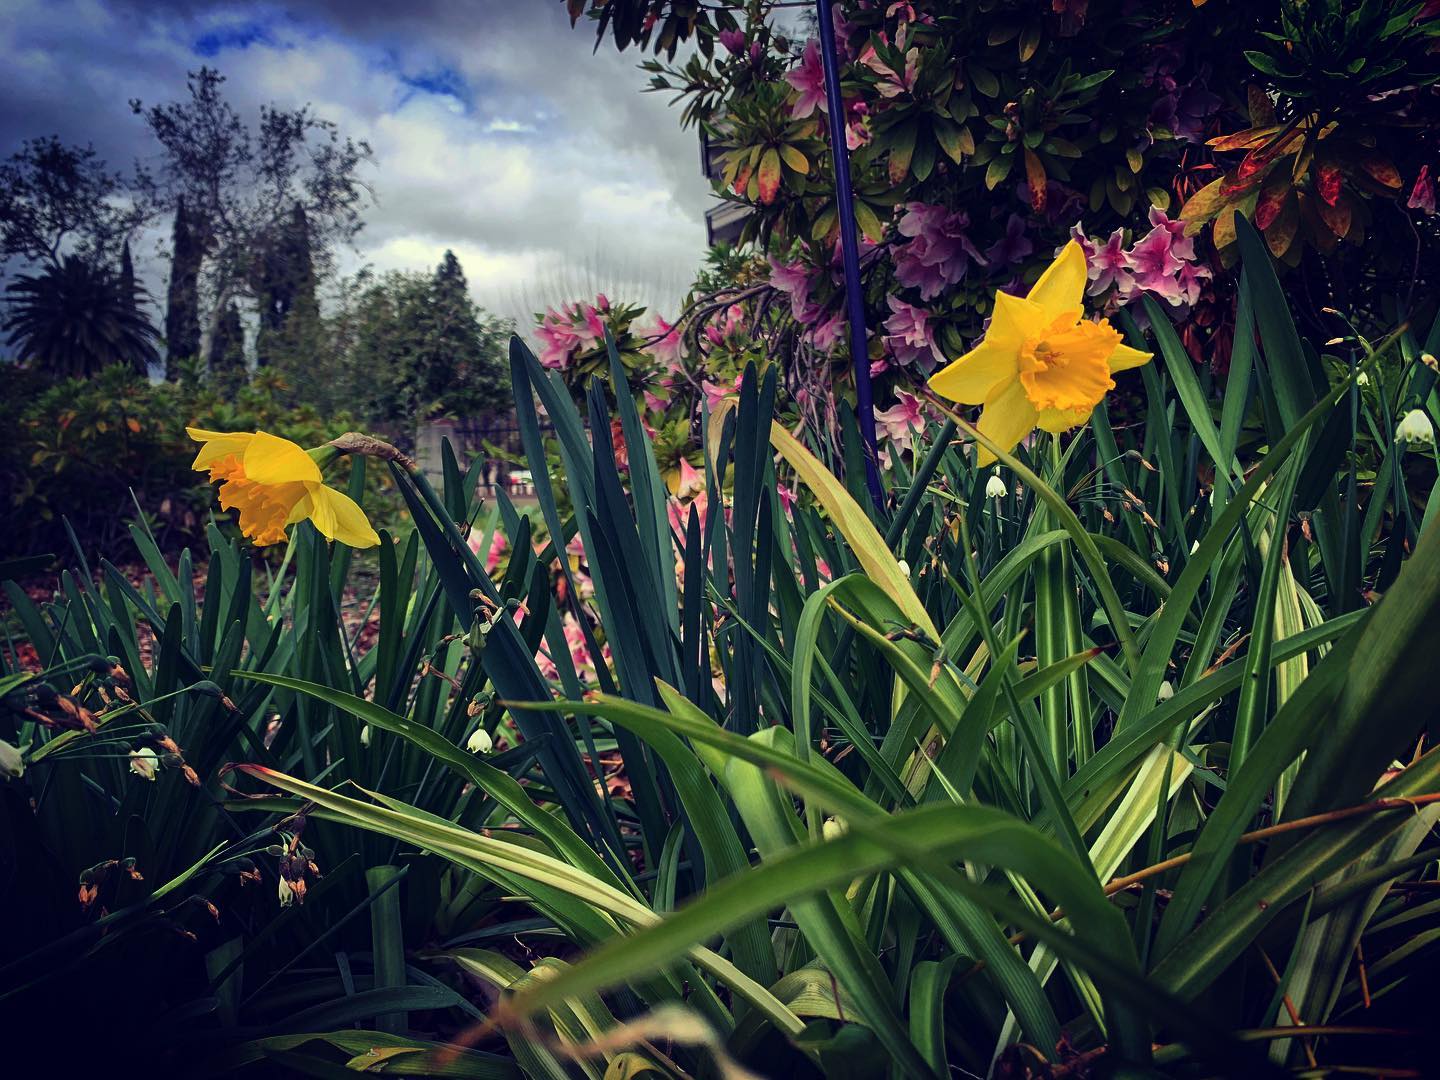 Daffodils, Snowflakes, and Azaleas in the Garden today via Instagram